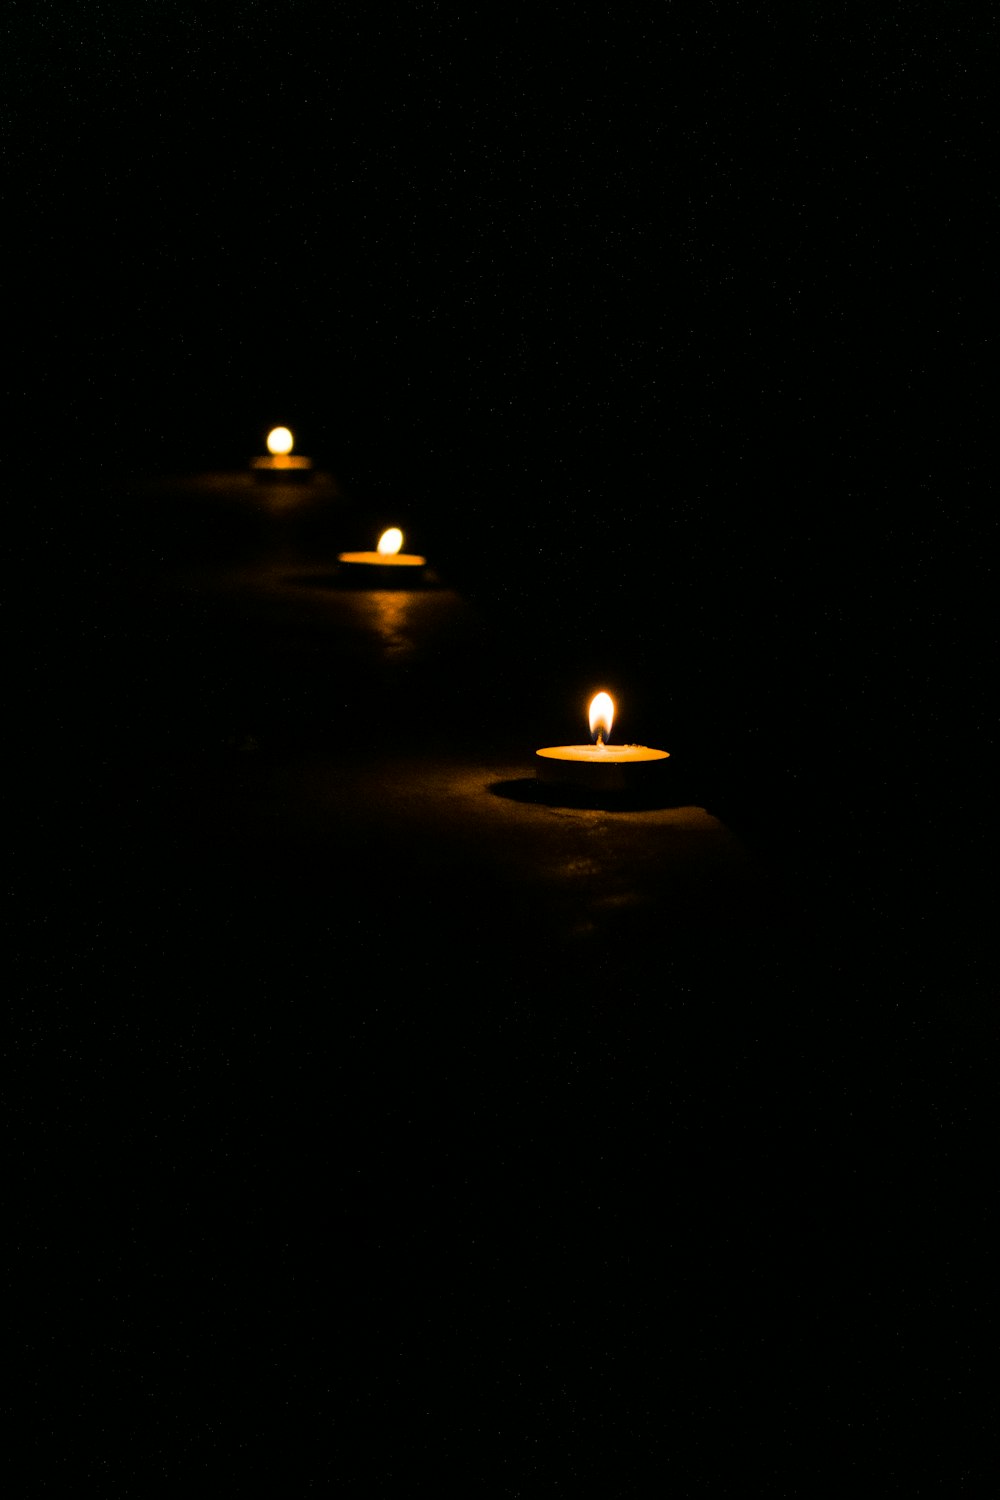 lighted candle in the dark